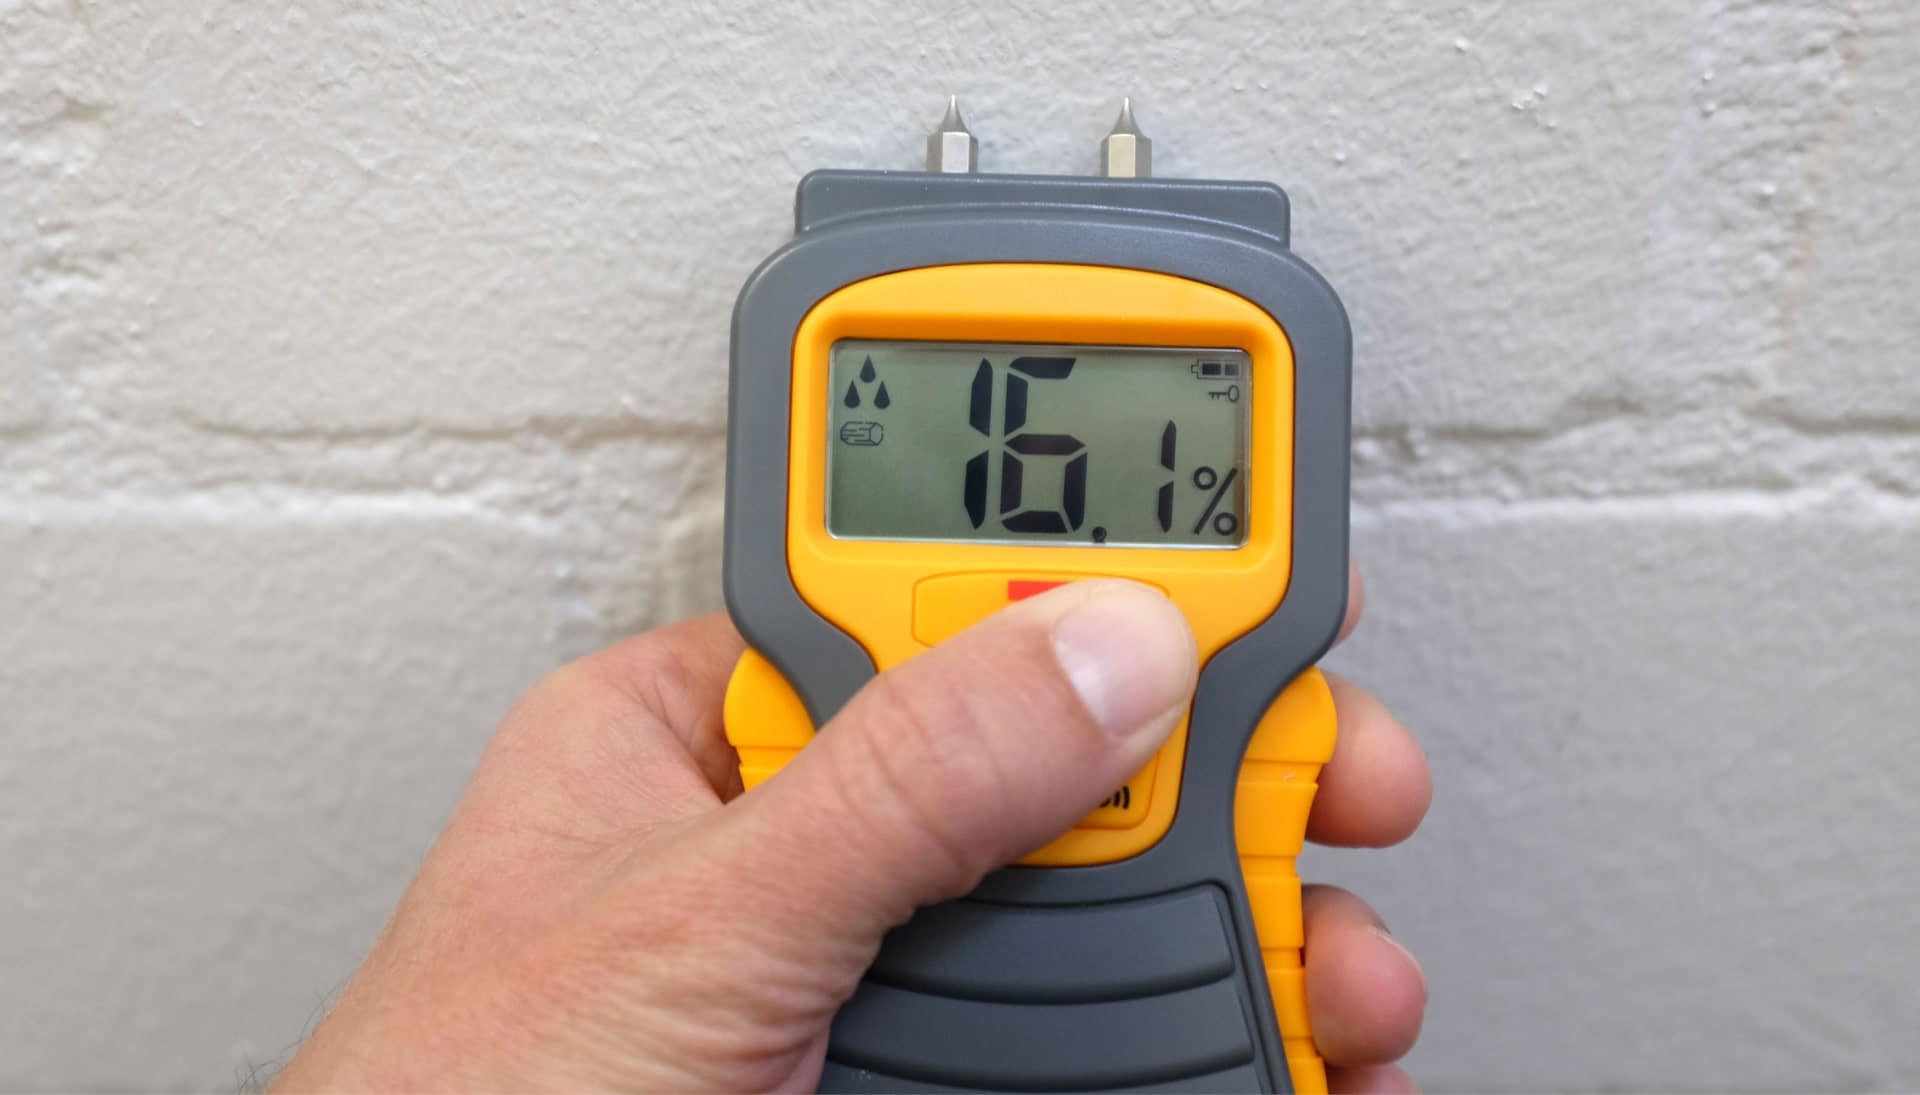 We provide fast, accurate, and affordable mold testing services in Chattanooga, Tennessee.